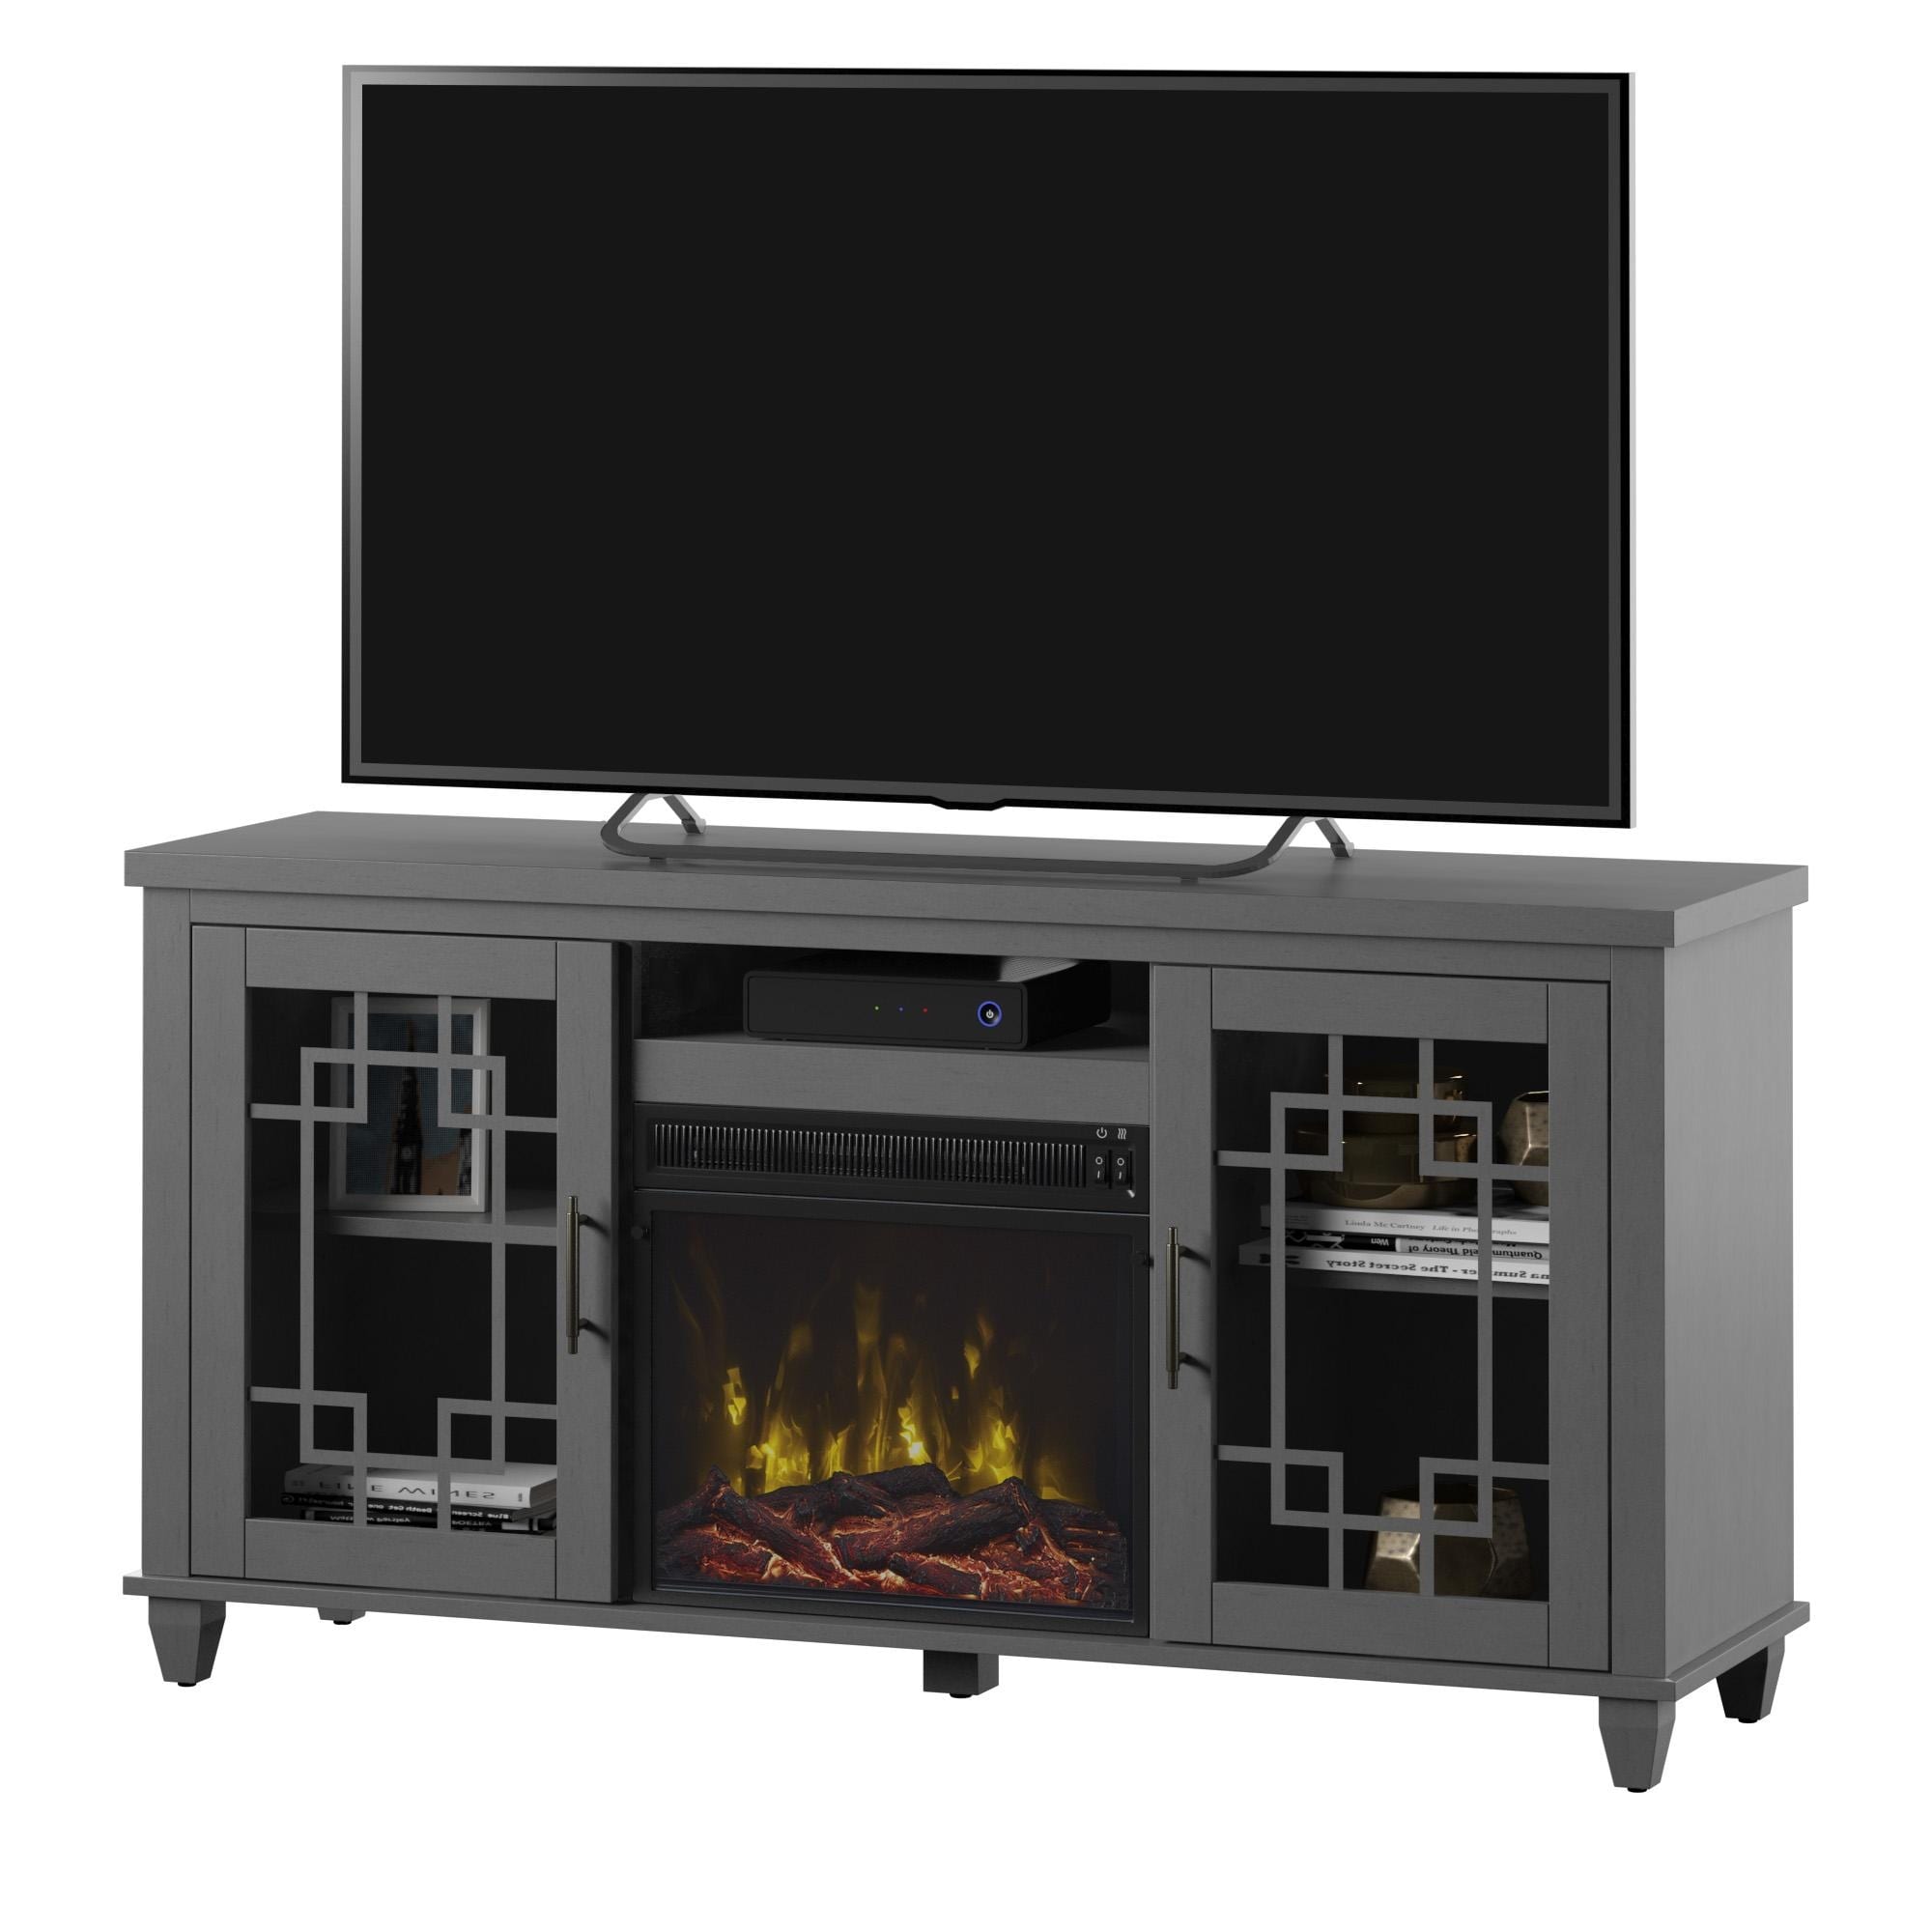 TV Stand for TVs up to 60" with Electric Fireplace - 54.5 " W x 15.5 " D x 28.0 " H